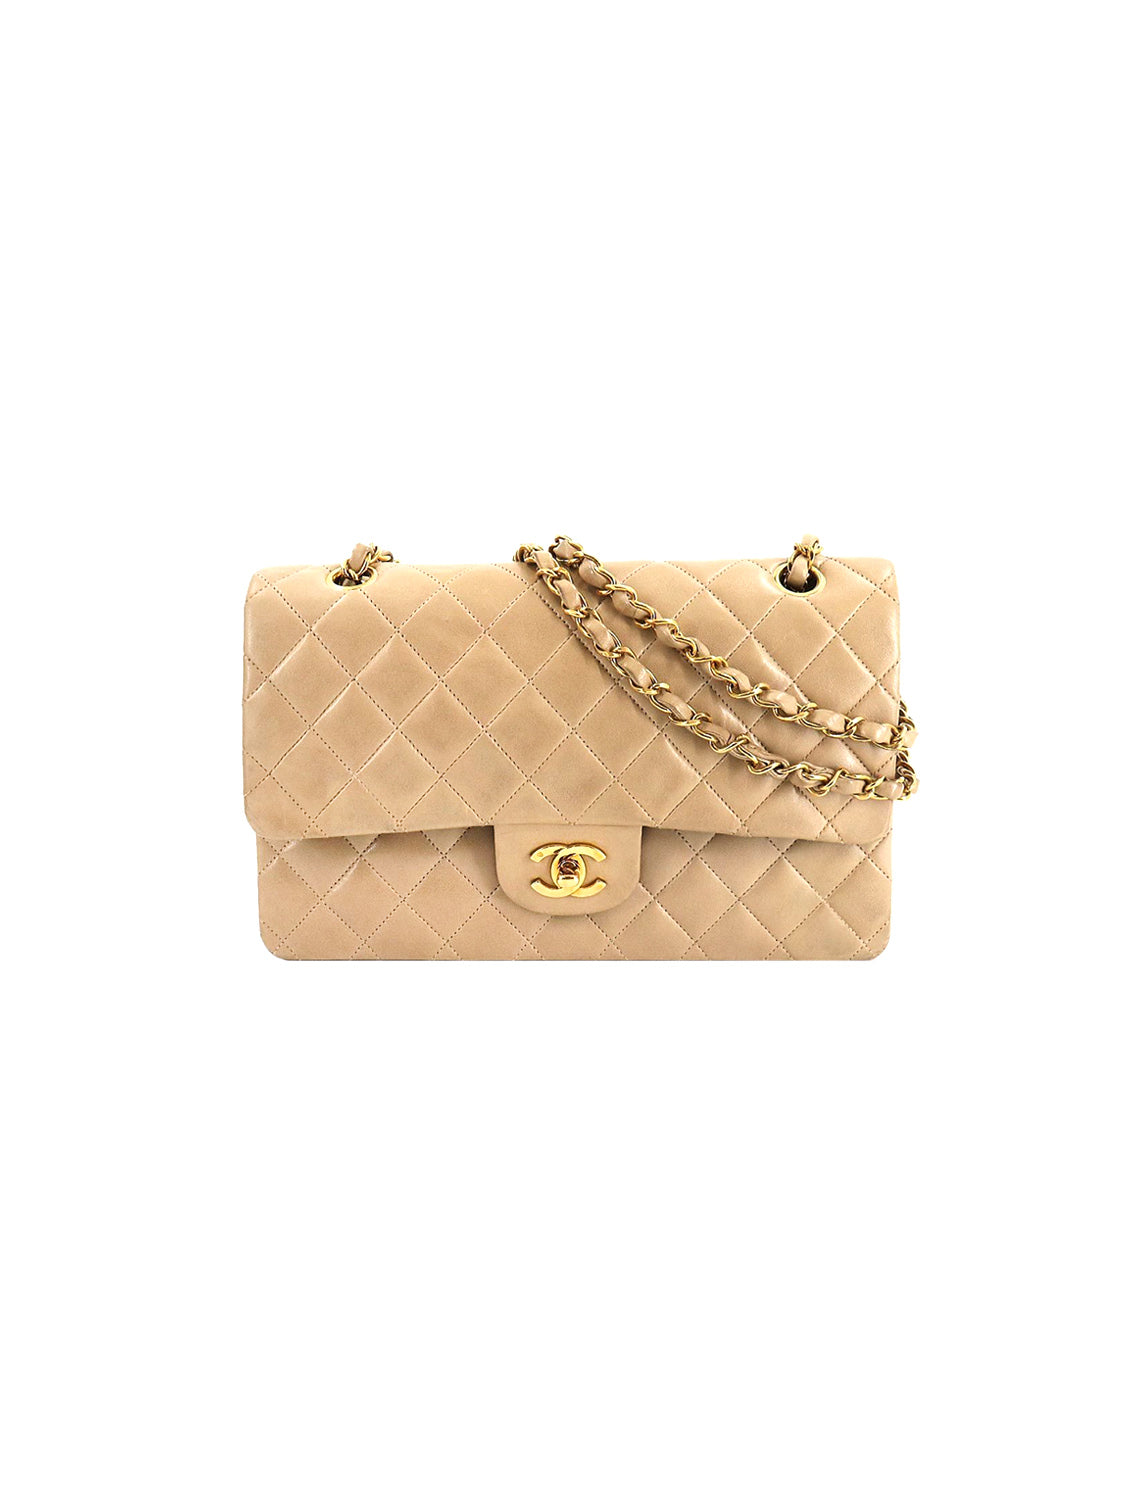 Chanel Tan Leather Chain Flap Bag